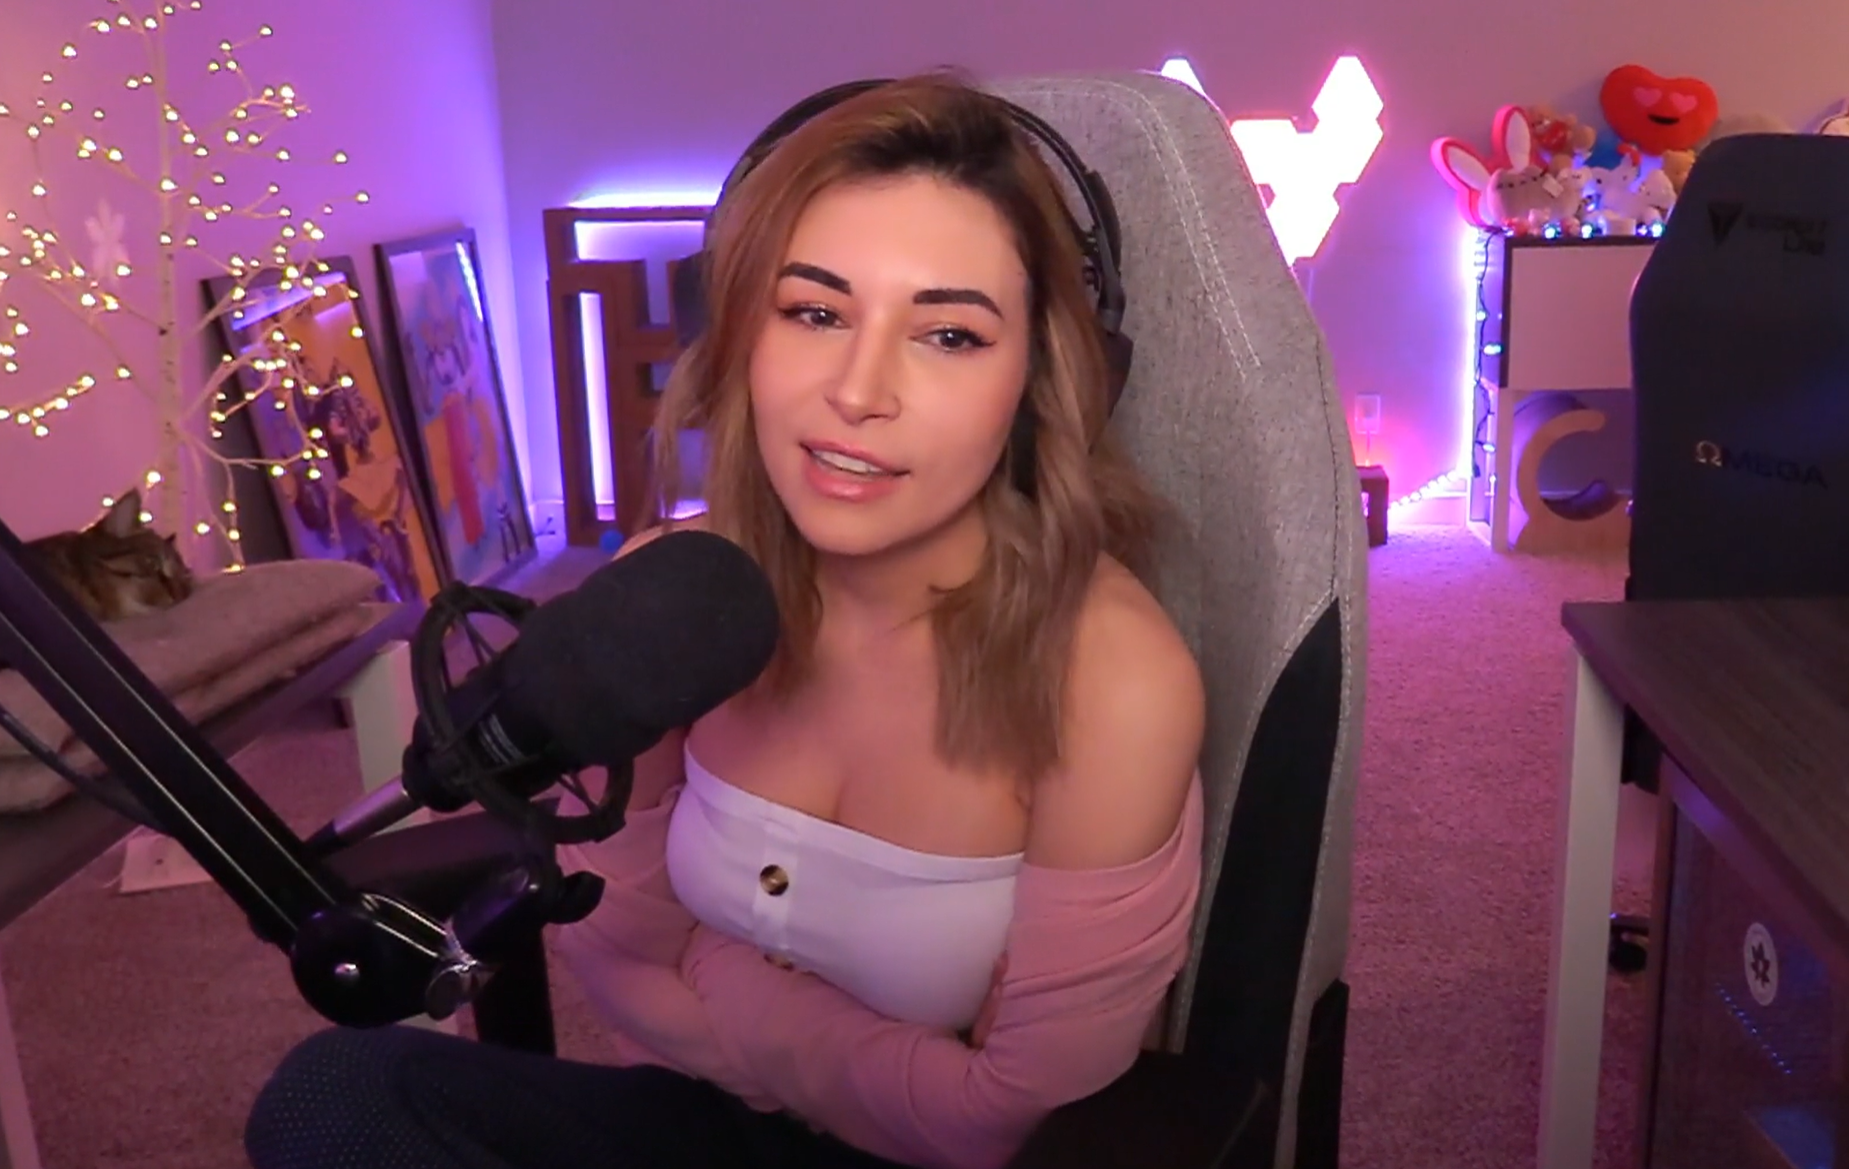 Female twitch streamers exposed